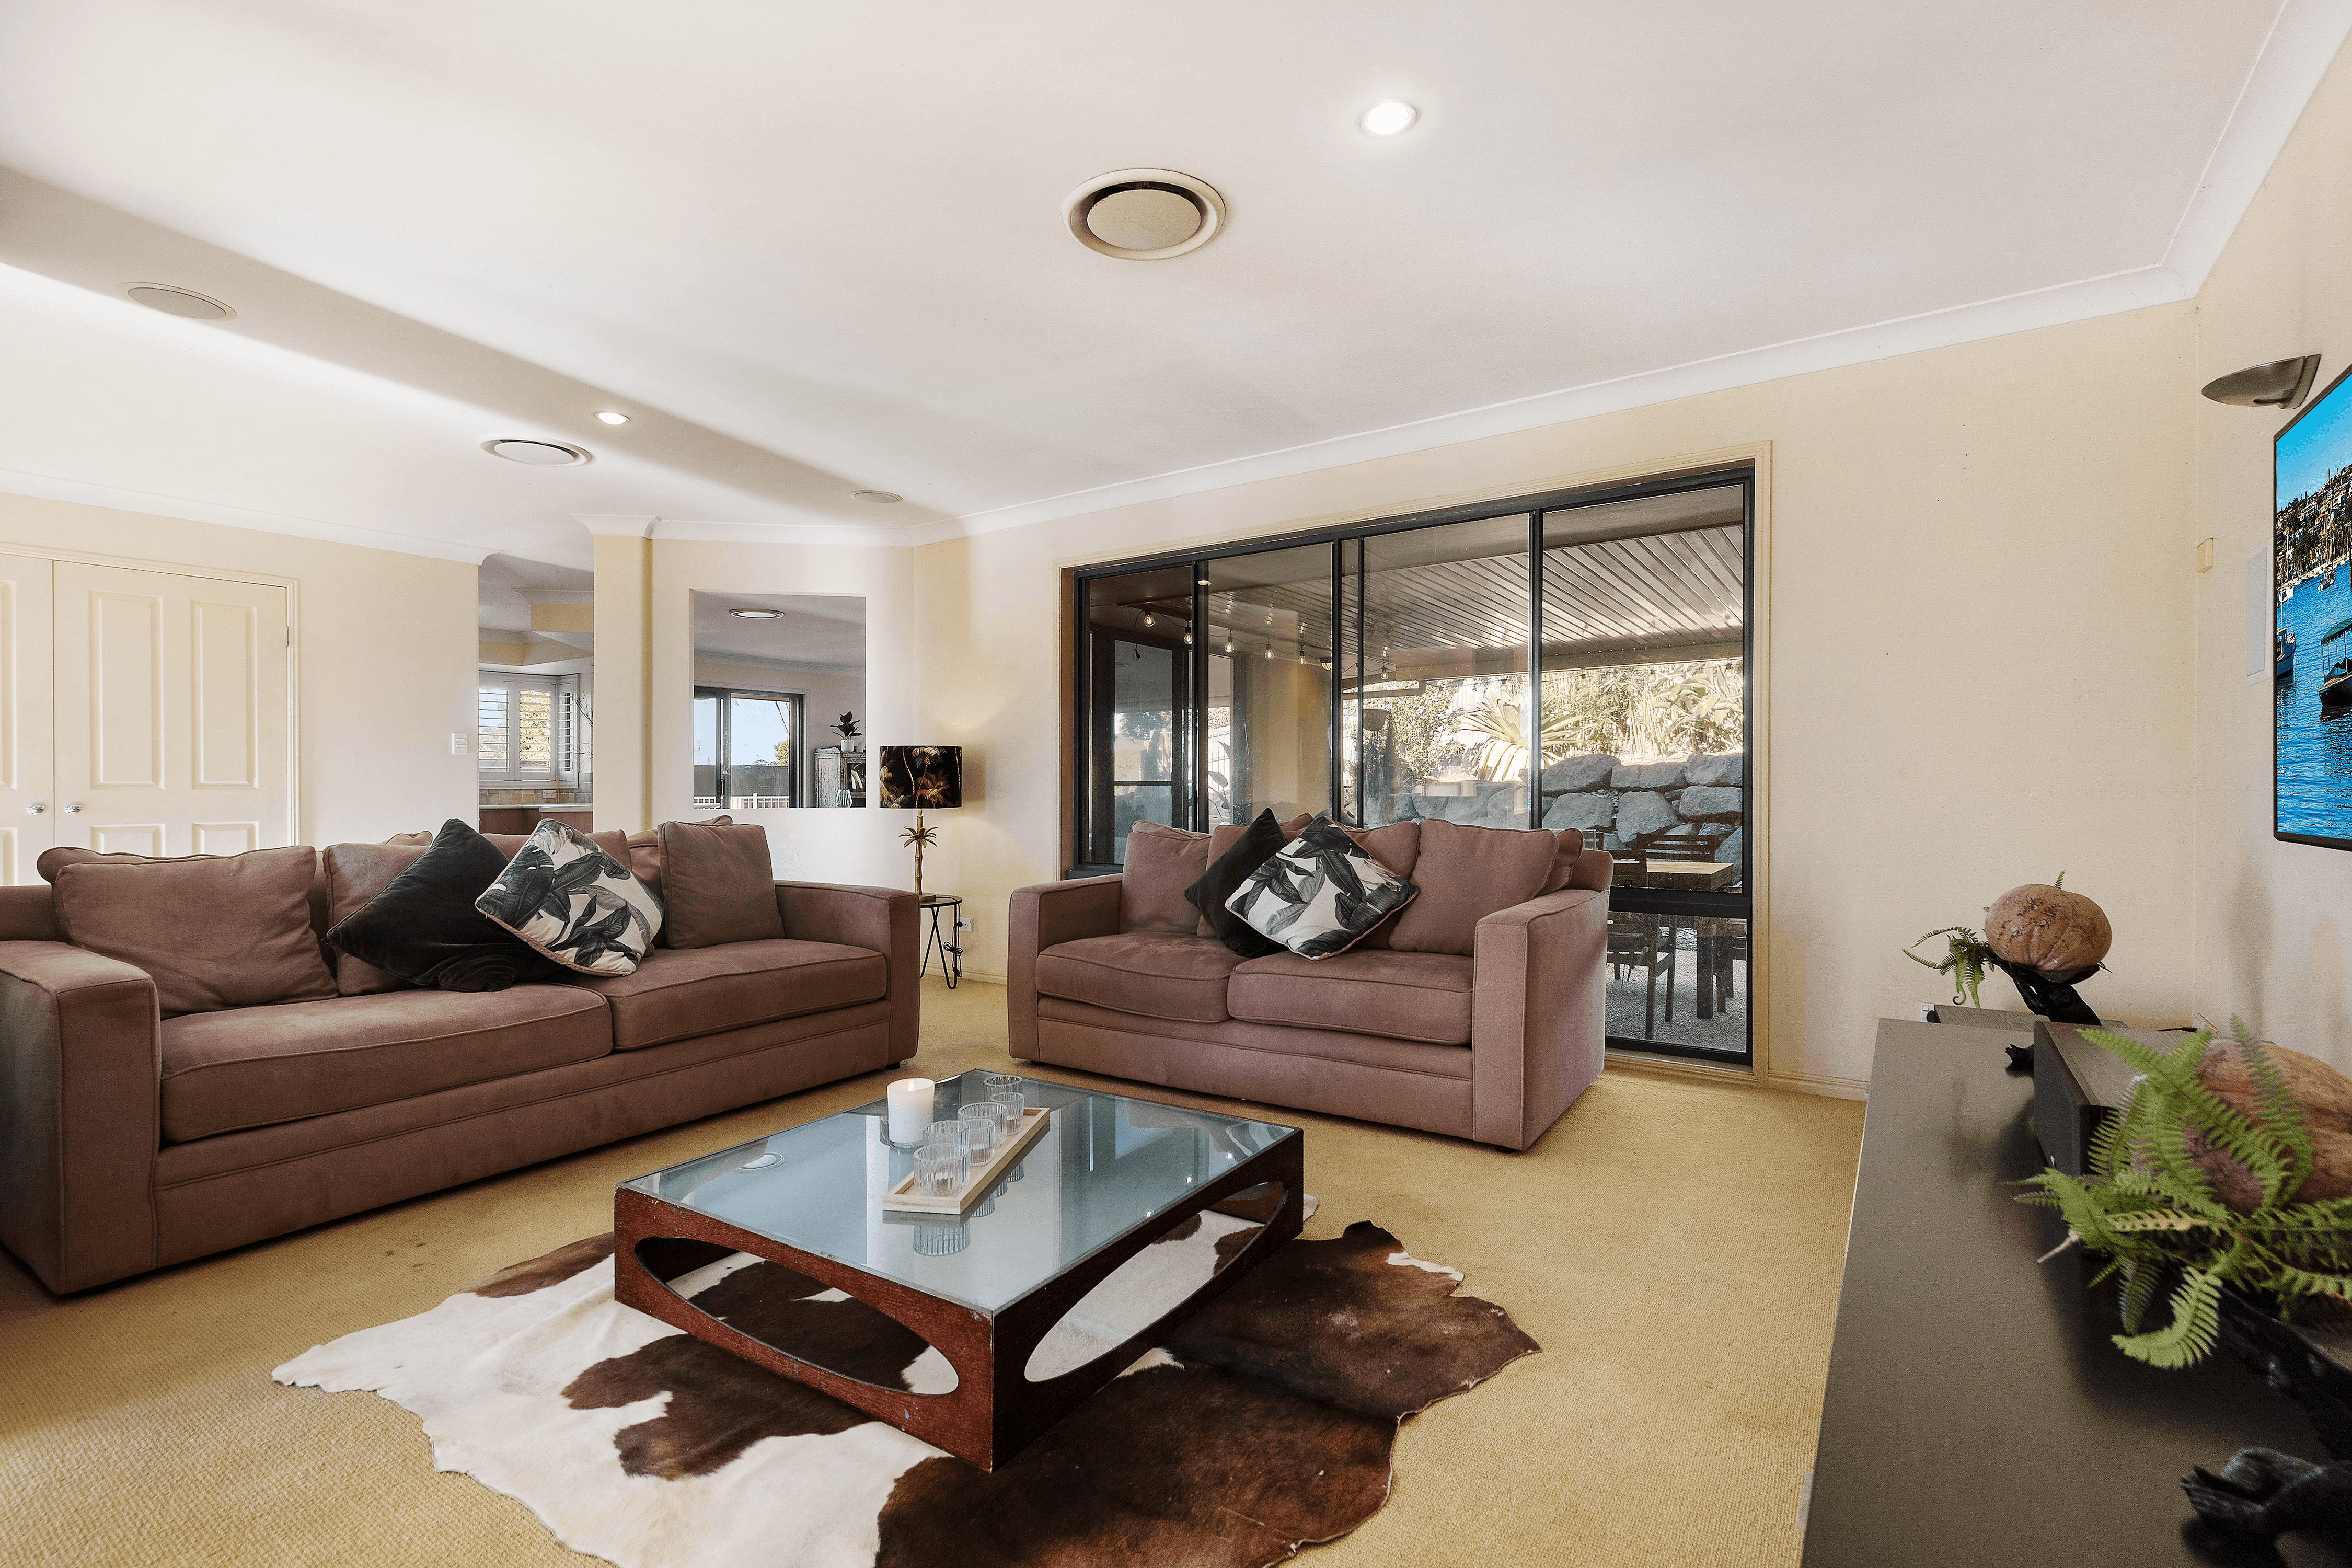 5 Bellerive Place, BANORA POINT, NSW 2486